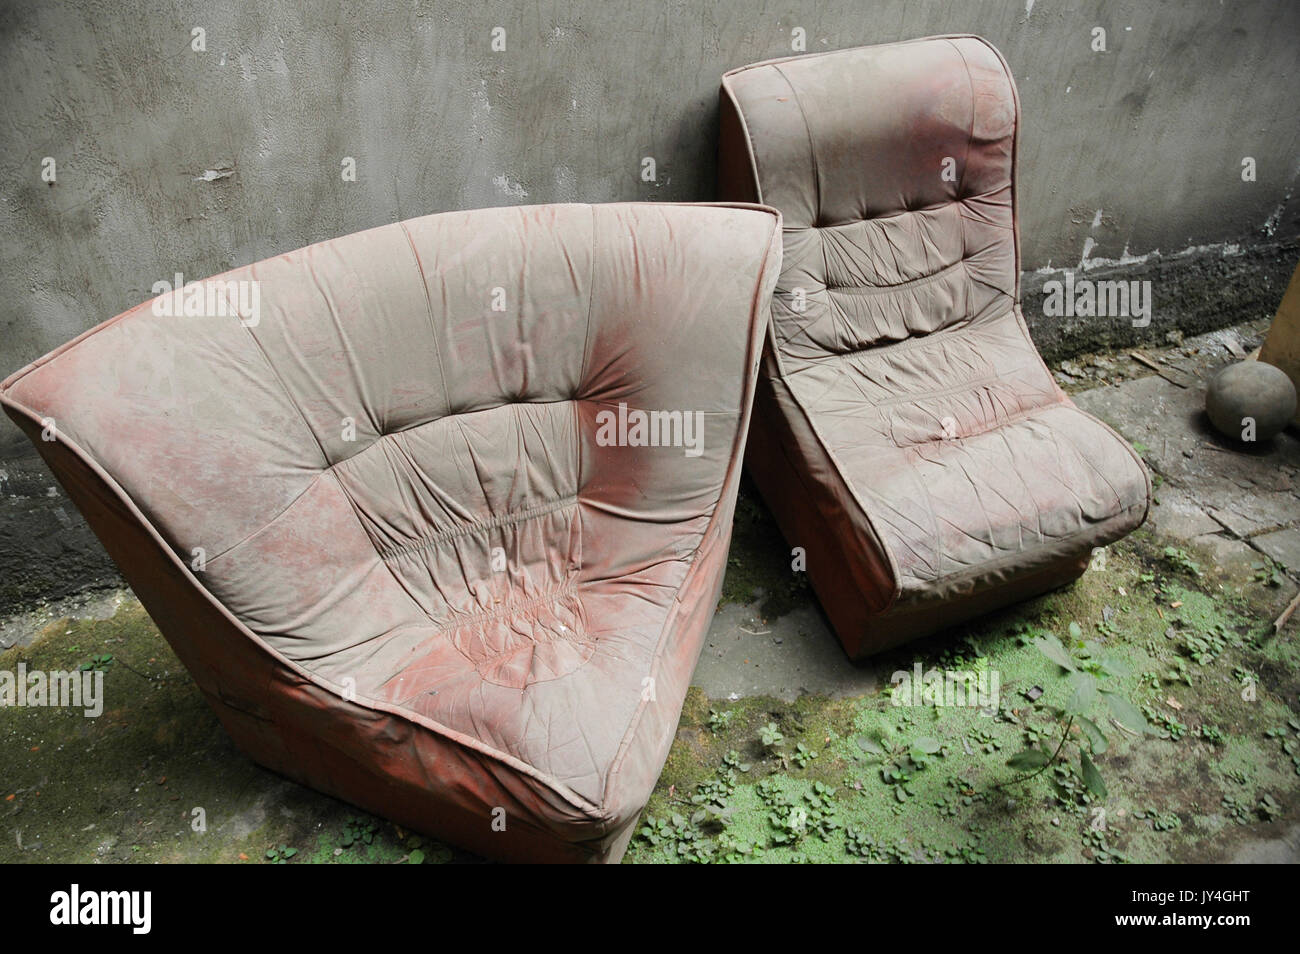 Discarded Furniture Stock Photos Discarded Furniture Stock